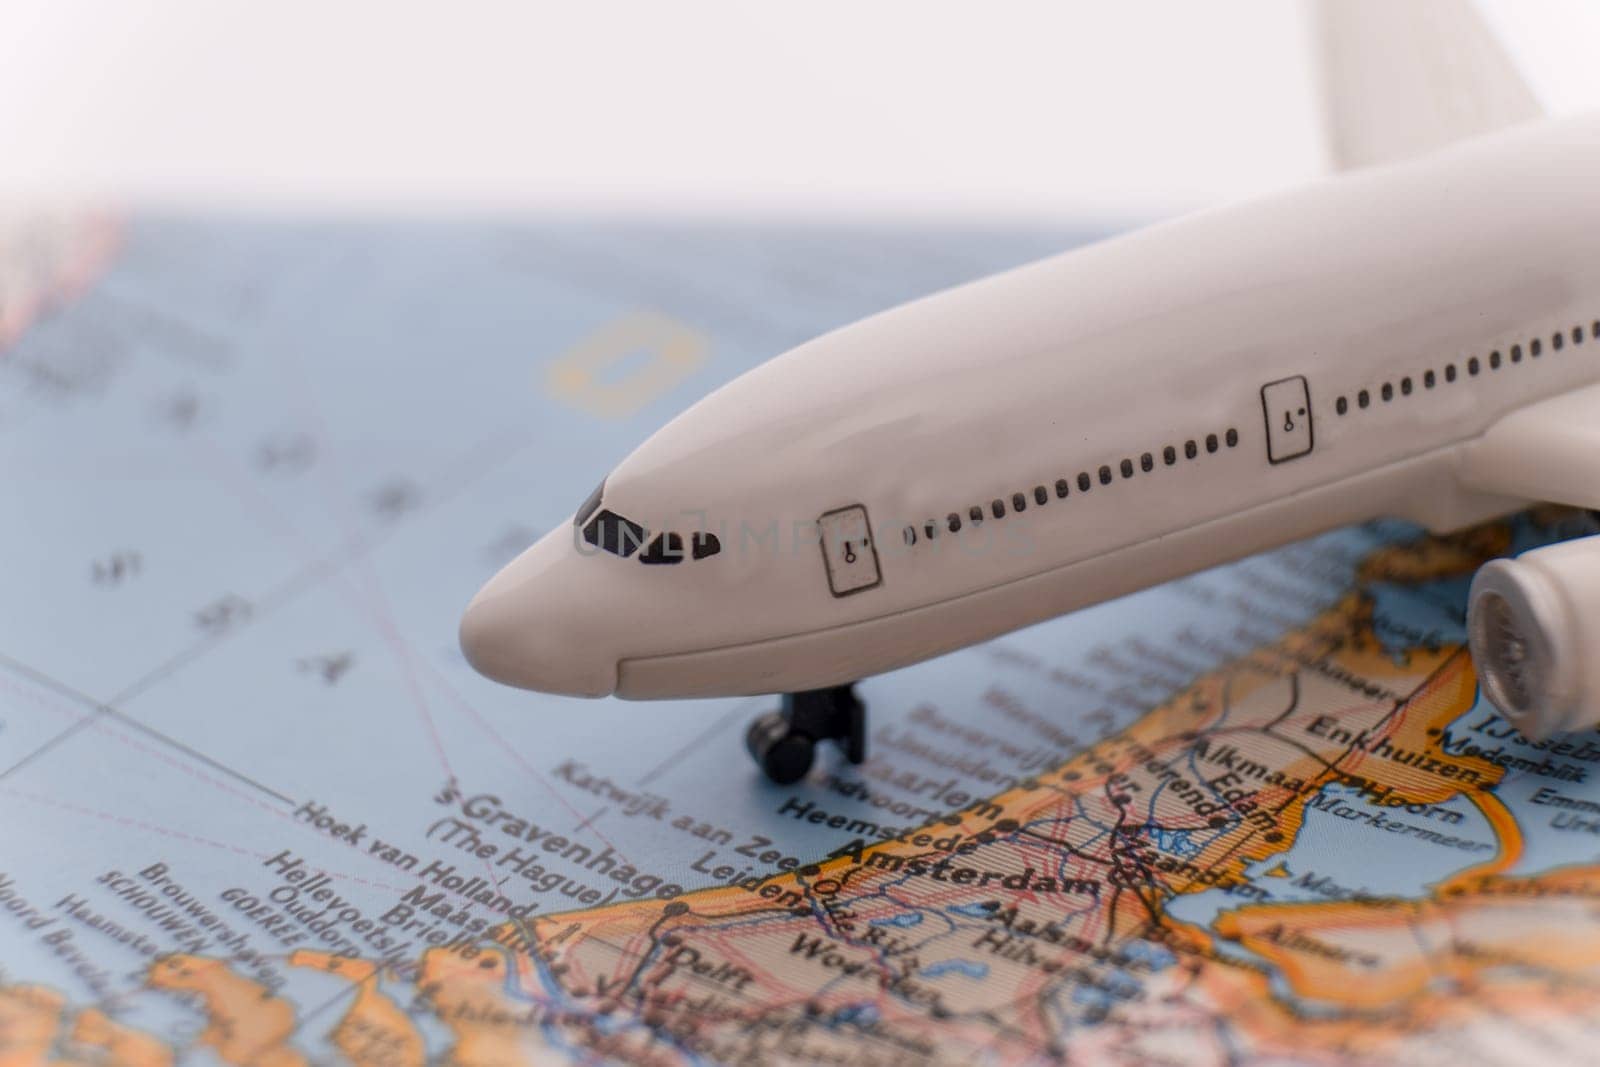 Close up detail of a miniature passenger airplane on a colorful map focusing on Amsterdam Netherlands through selective focus, background blur.